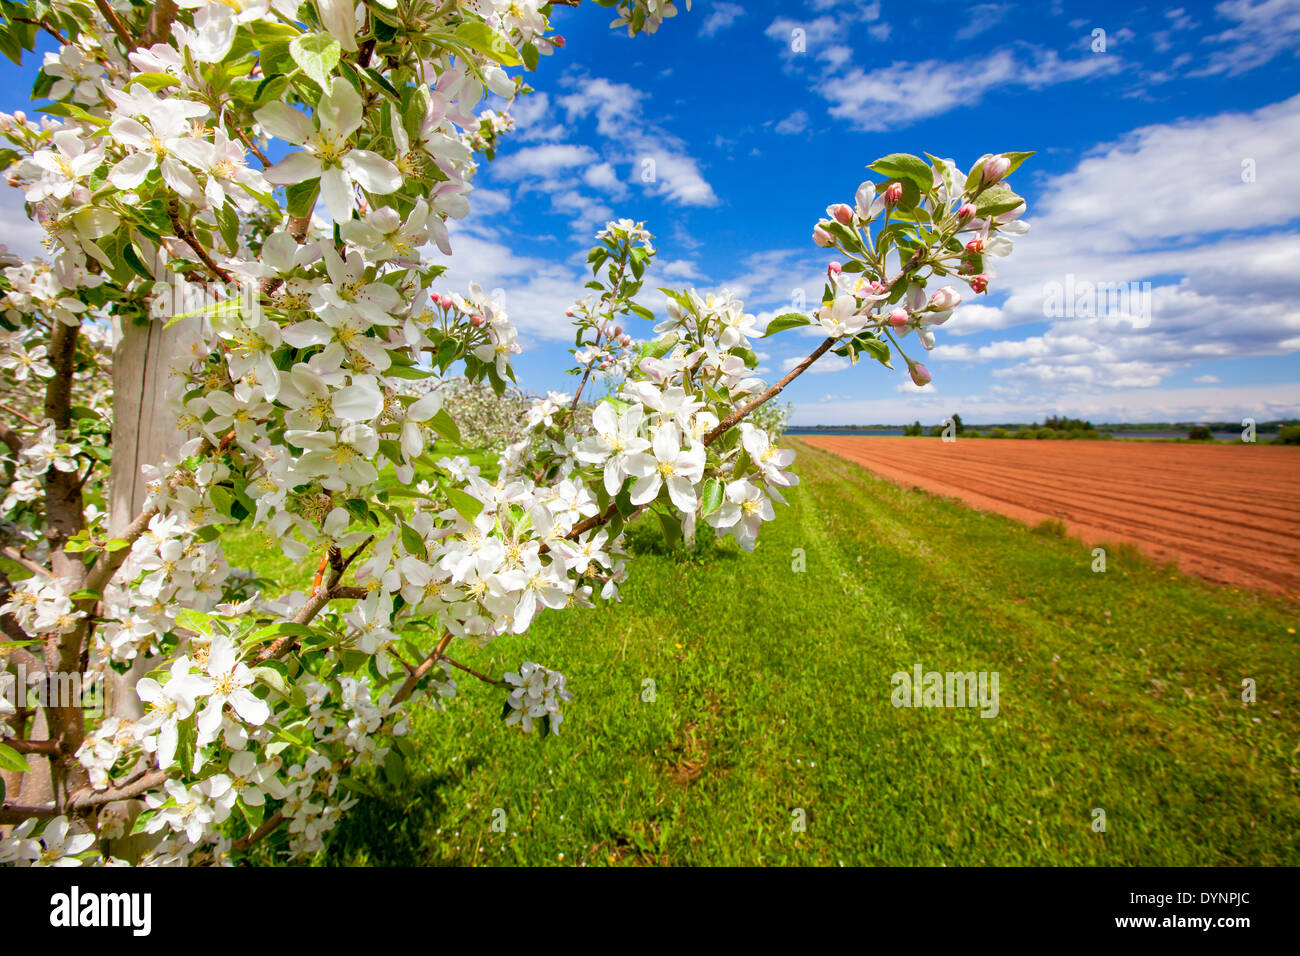 View of farmland and apple blossoms in an apple orchard. Stock Photo